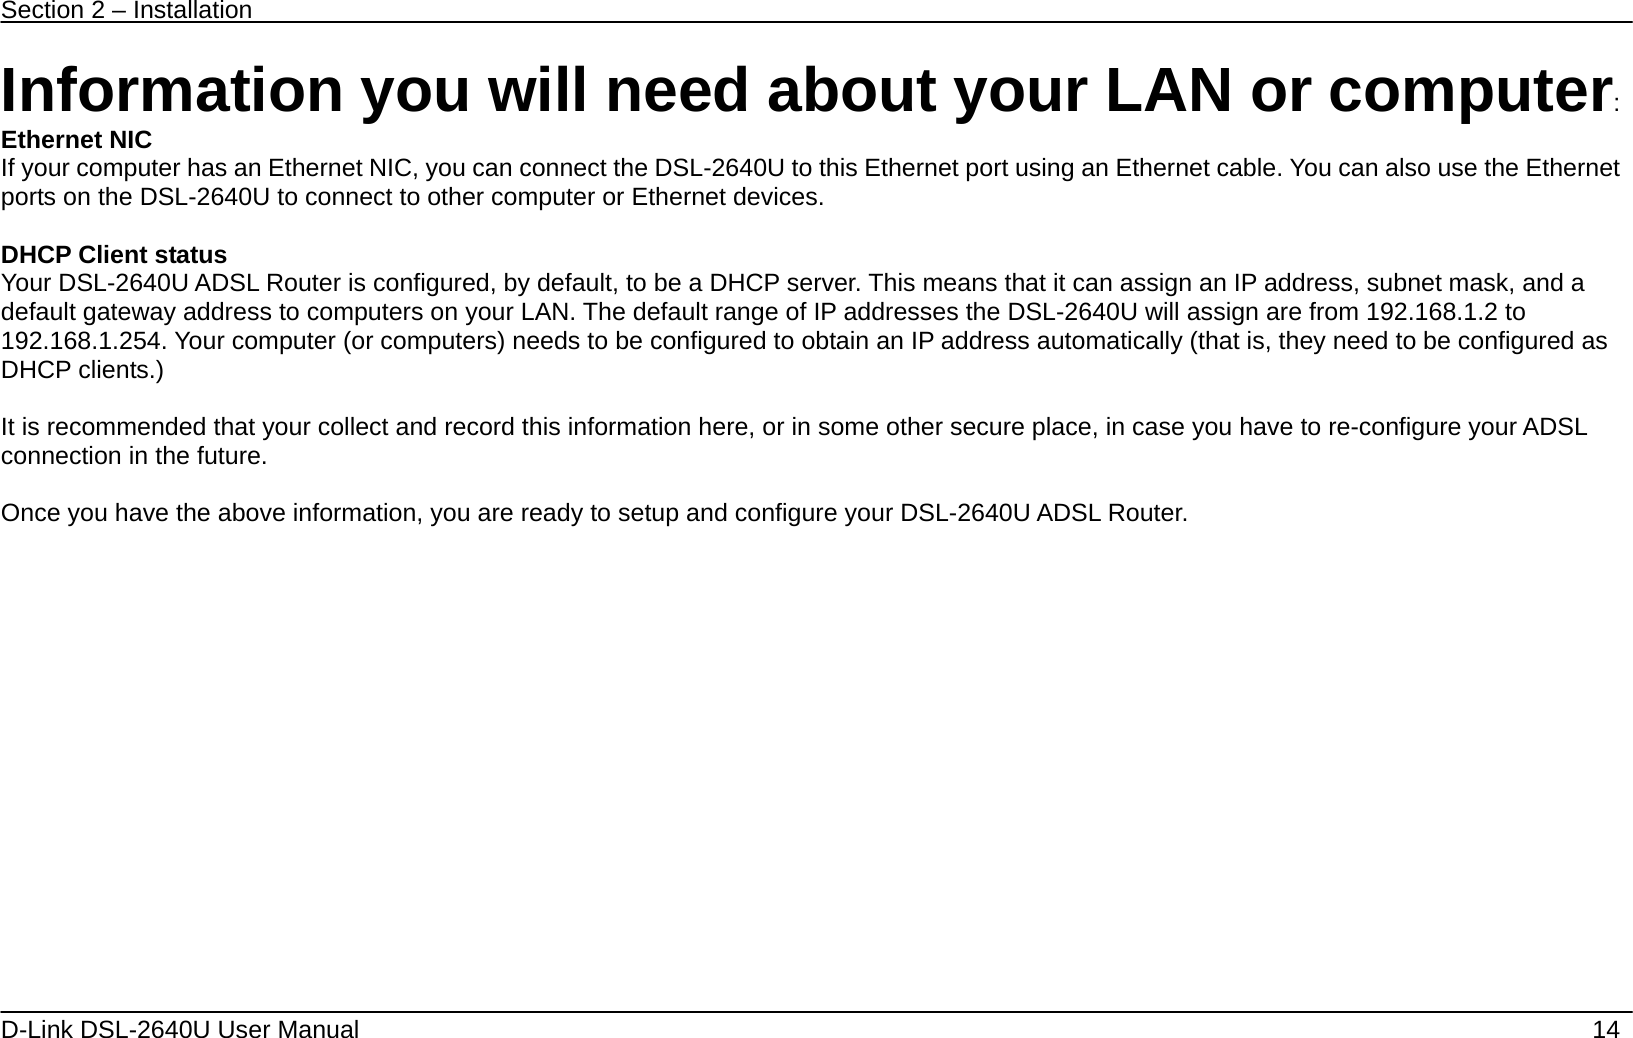 Section 2 – Installation   D-Link DSL-2640U User Manual    14 Information you will need about your LAN or computer: Ethernet NIC If your computer has an Ethernet NIC, you can connect the DSL-2640U to this Ethernet port using an Ethernet cable. You can also use the Ethernet ports on the DSL-2640U to connect to other computer or Ethernet devices.  DHCP Client status Your DSL-2640U ADSL Router is configured, by default, to be a DHCP server. This means that it can assign an IP address, subnet mask, and a default gateway address to computers on your LAN. The default range of IP addresses the DSL-2640U will assign are from 192.168.1.2 to 192.168.1.254. Your computer (or computers) needs to be configured to obtain an IP address automatically (that is, they need to be configured as DHCP clients.)    It is recommended that your collect and record this information here, or in some other secure place, in case you have to re-configure your ADSL connection in the future.  Once you have the above information, you are ready to setup and configure your DSL-2640U ADSL Router. 